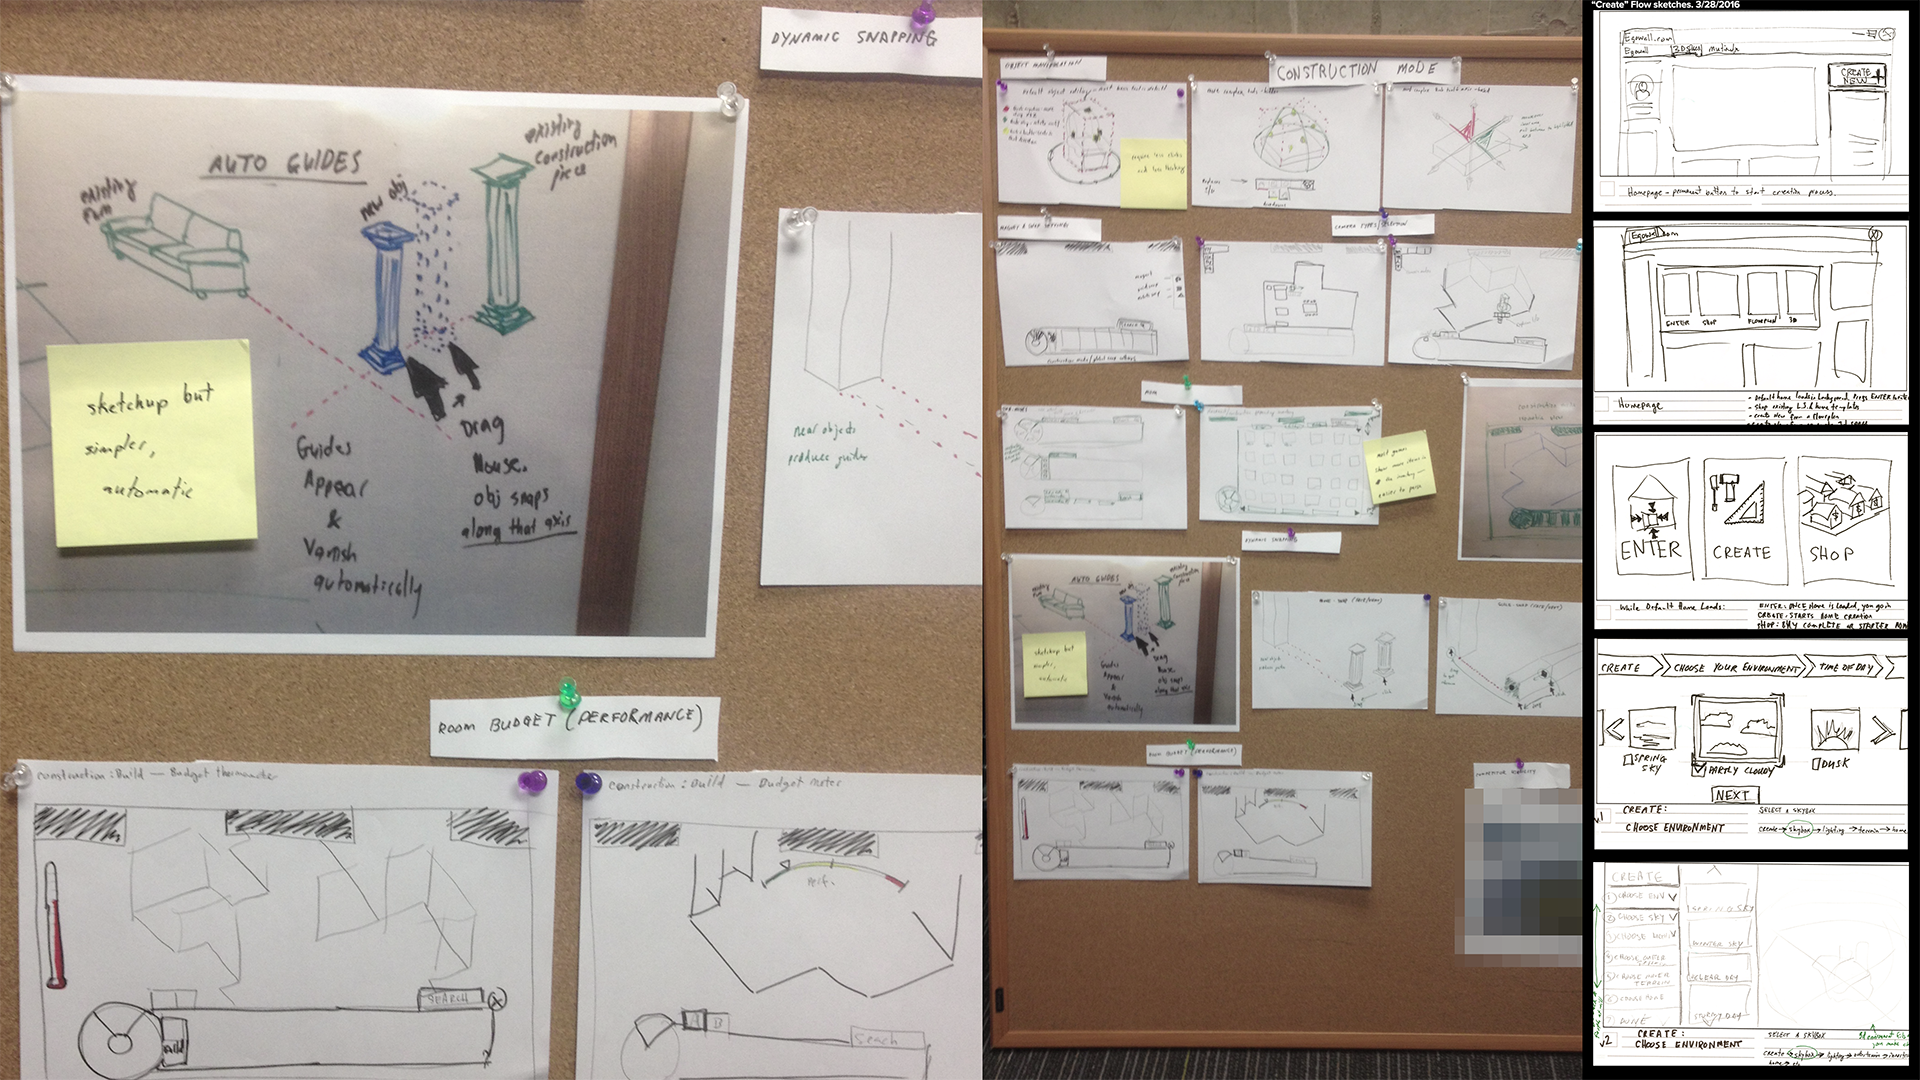 Image of potential user interactions and wireframe sketches.